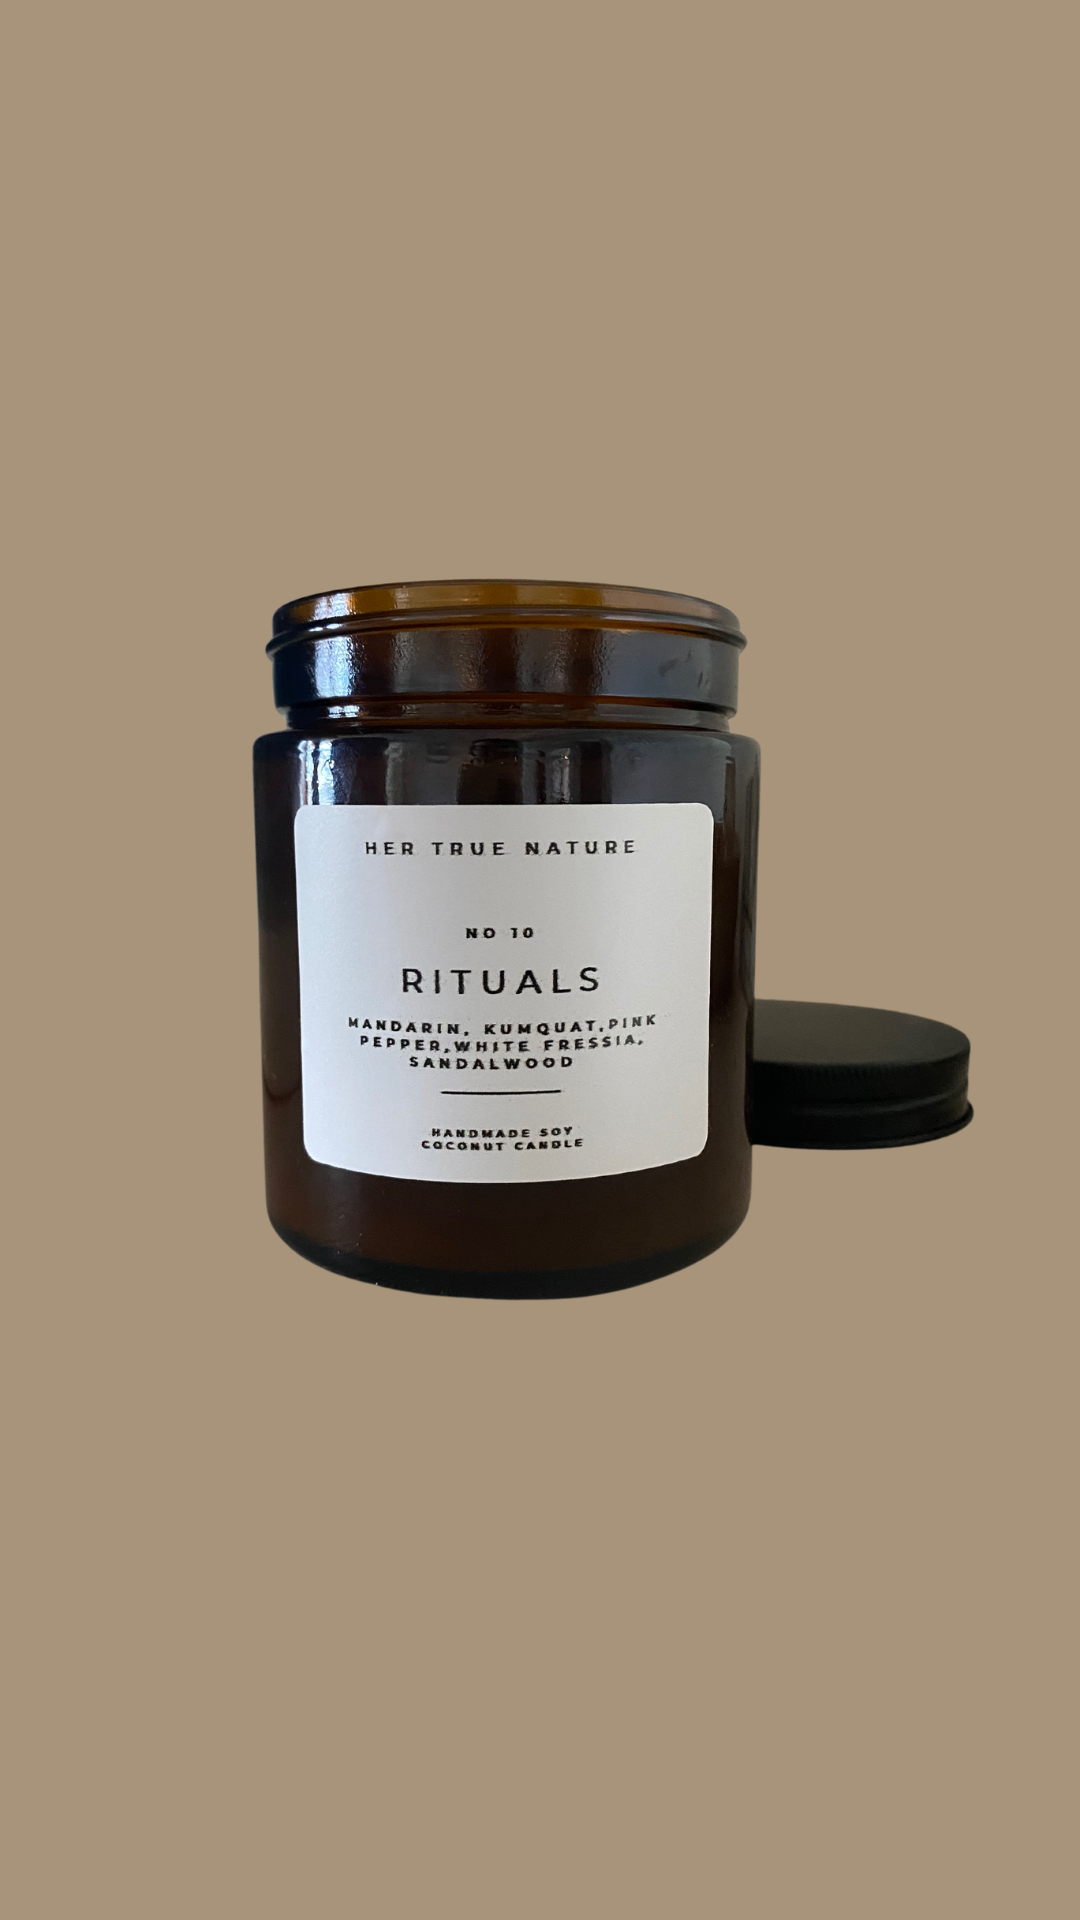 Rituals Candle in Amber Jar